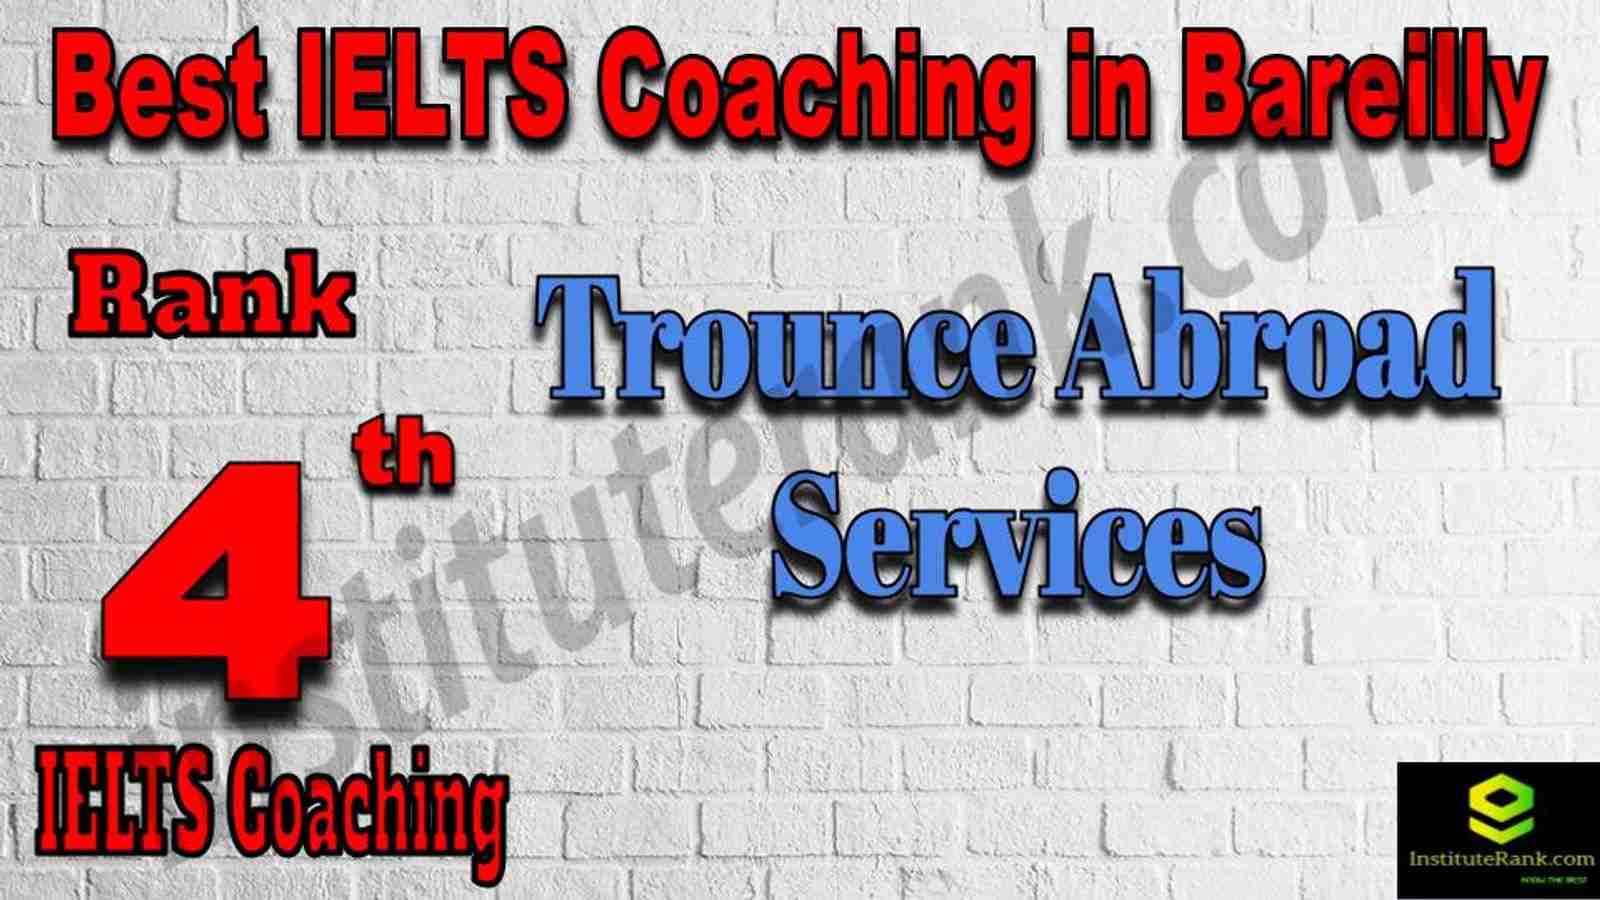 4th Best IELTS Coaching in Bareilly